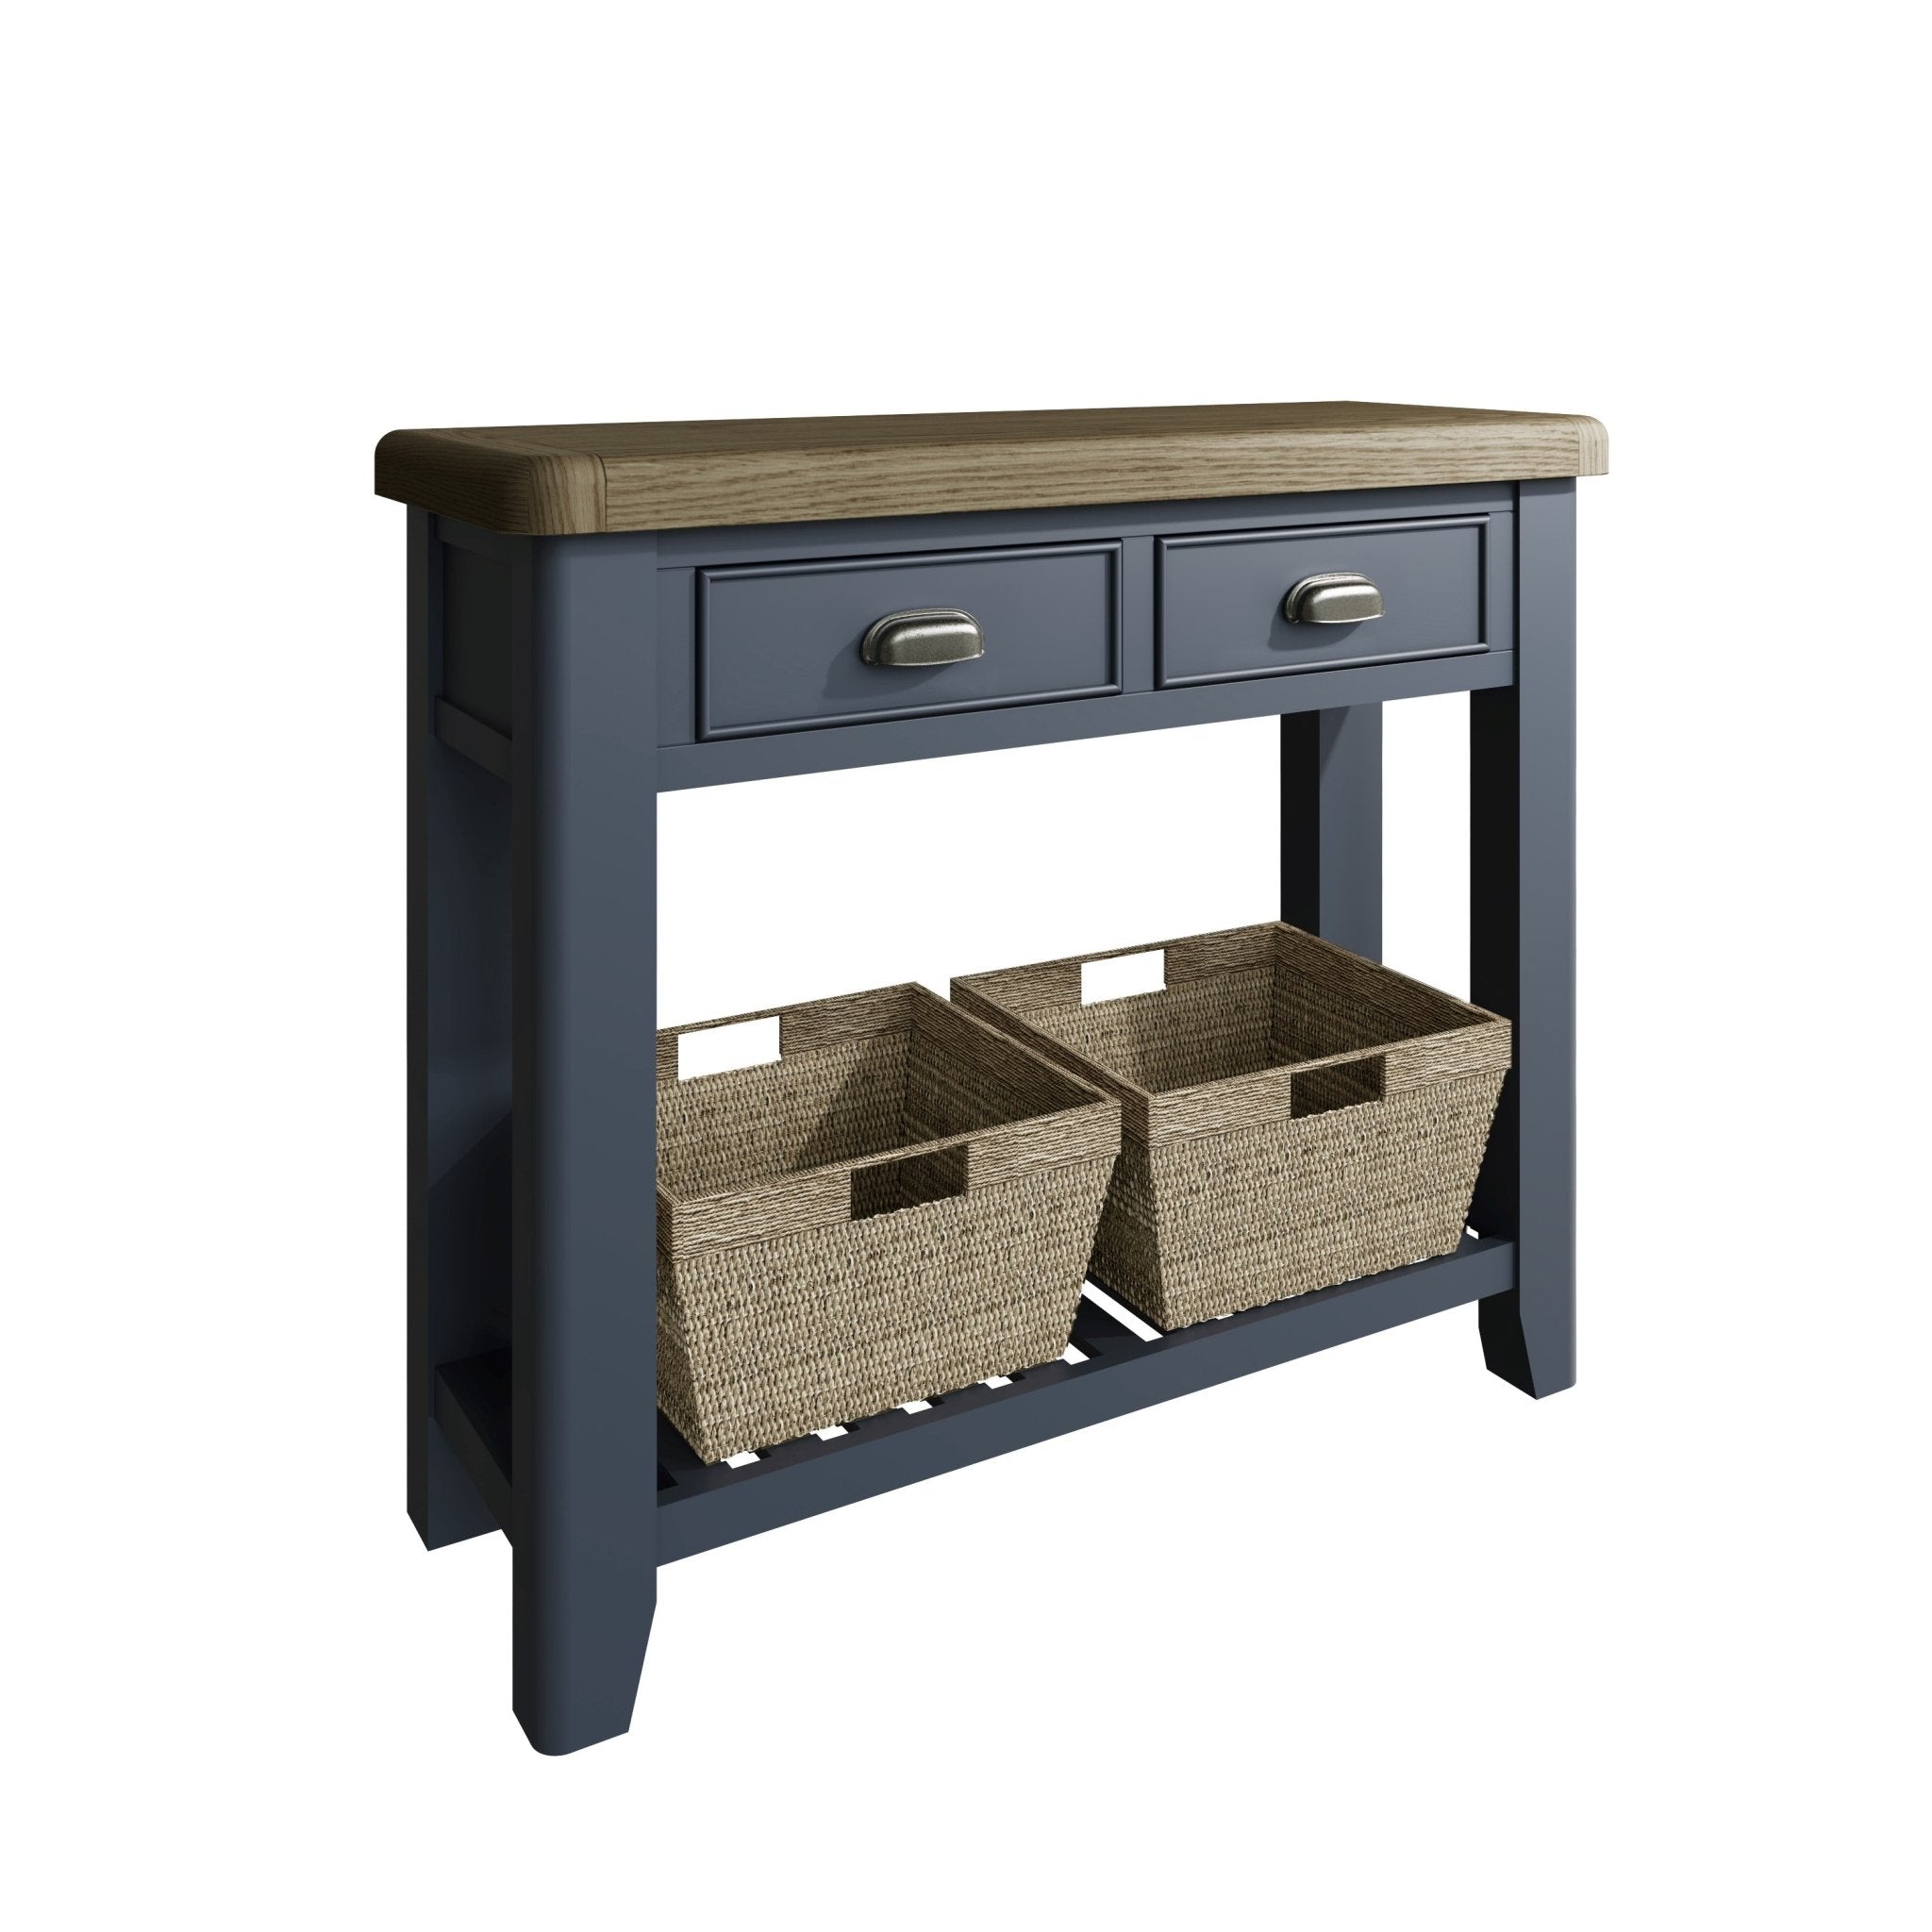 Rogate Blue Painted Console Table with 2 Baskets - Duck Barn Interiors